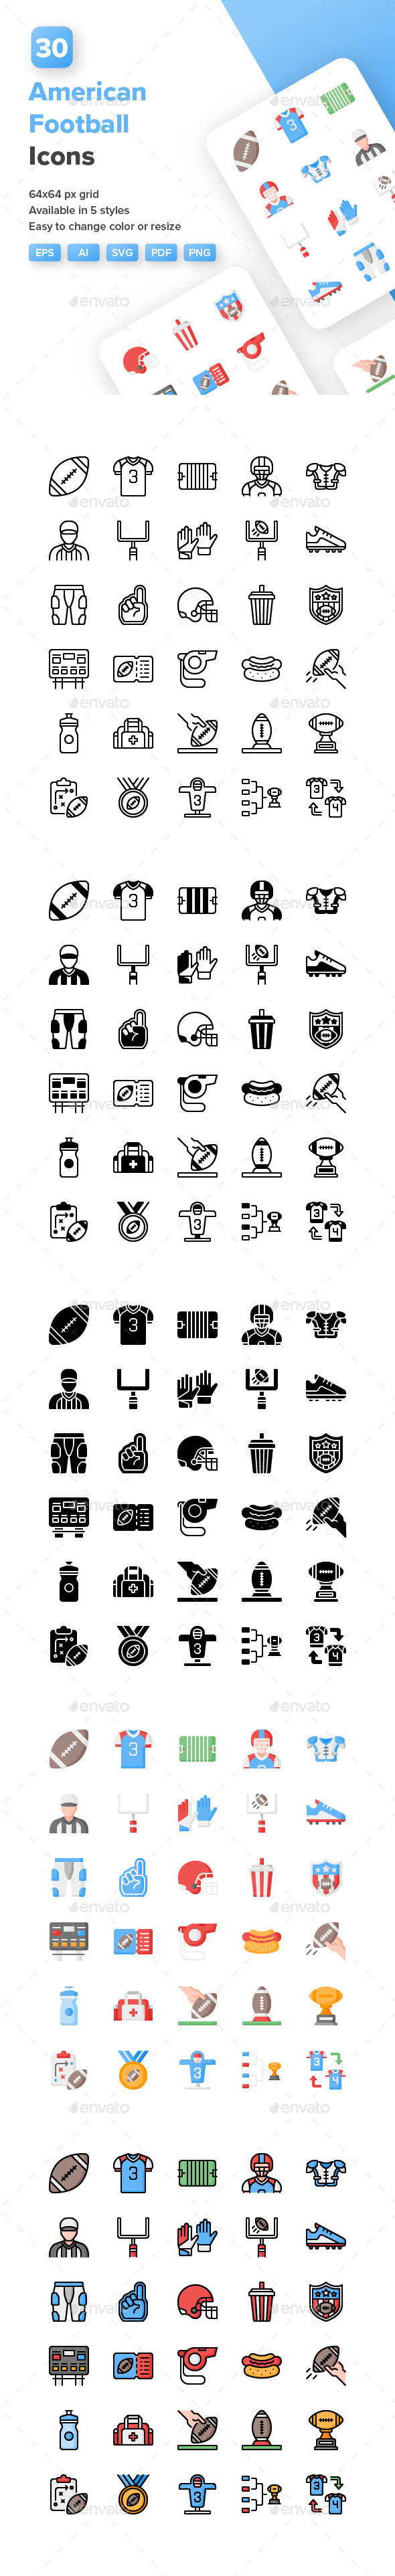 [DOWNLOAD]American Football Icons